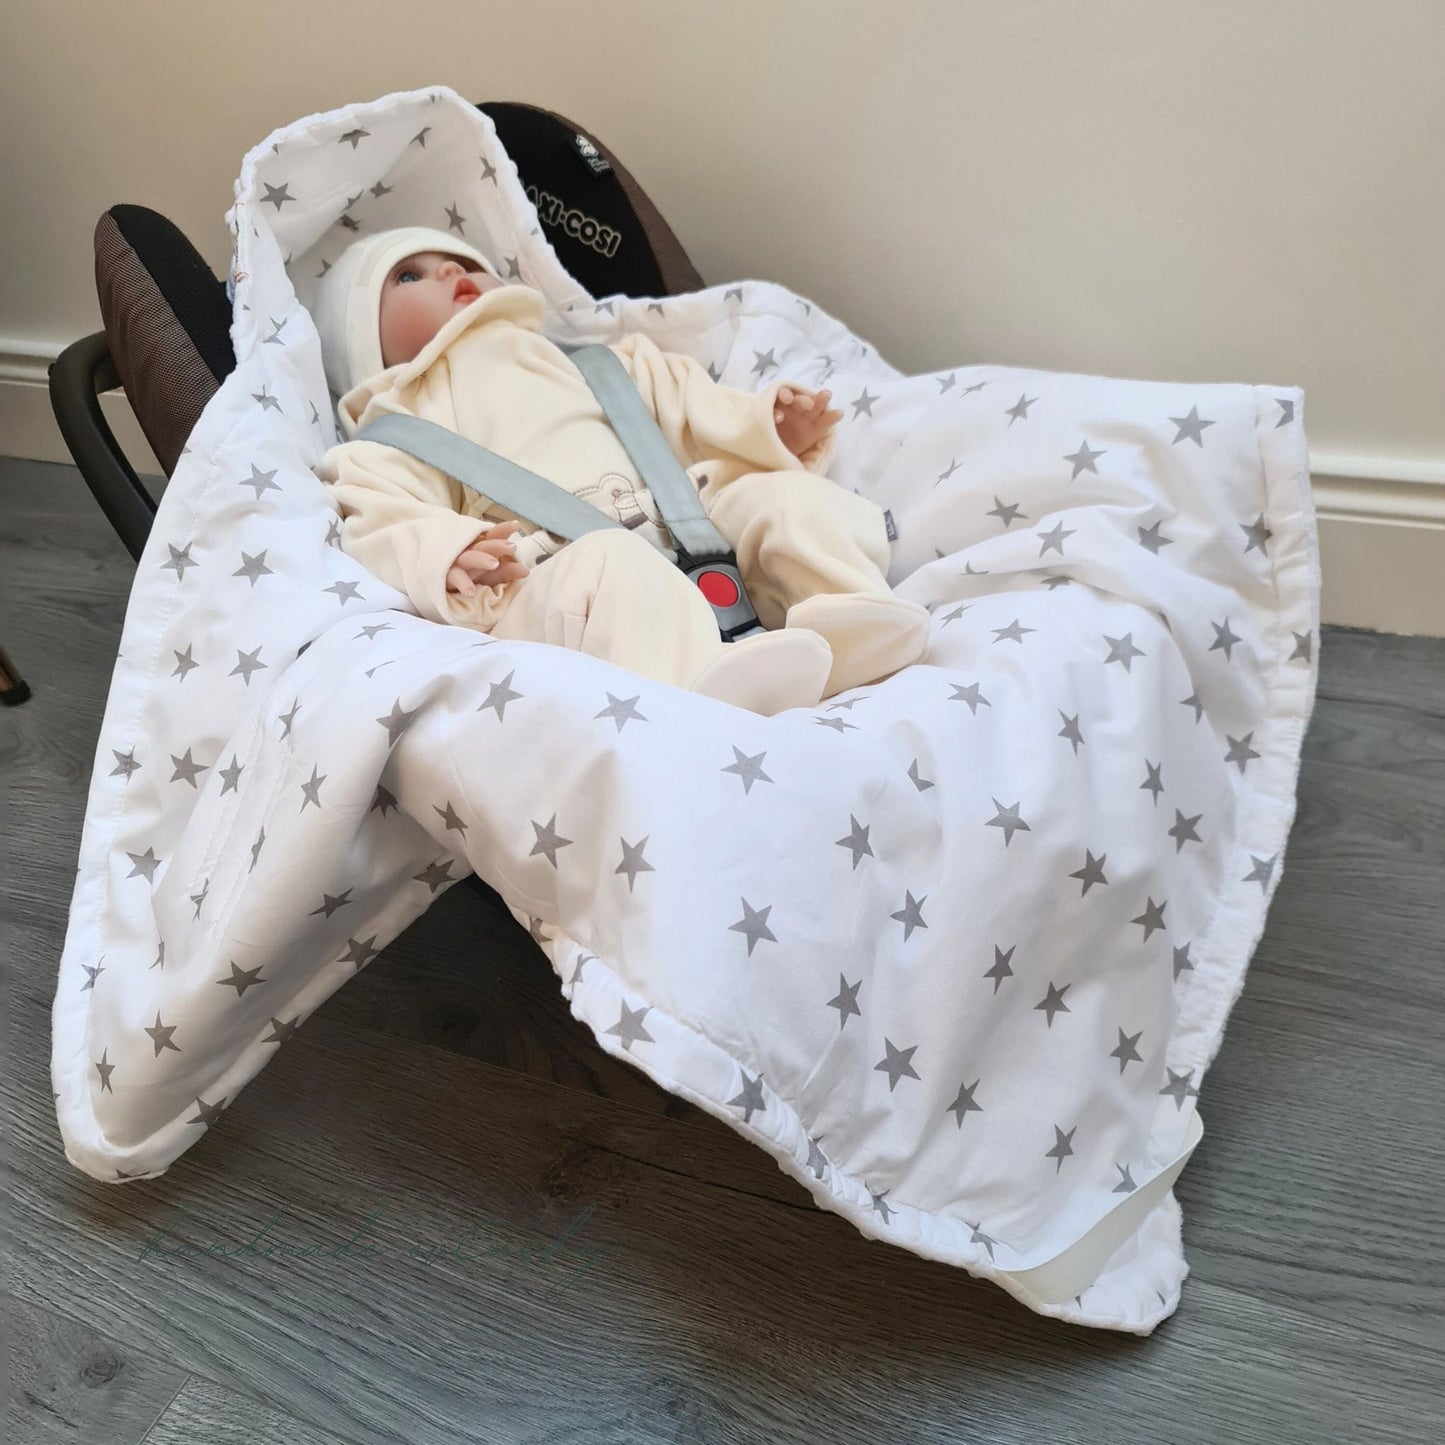 Image: A white car seat blanket with grey stars, featuring a convenient hood for added comfort and warmth.